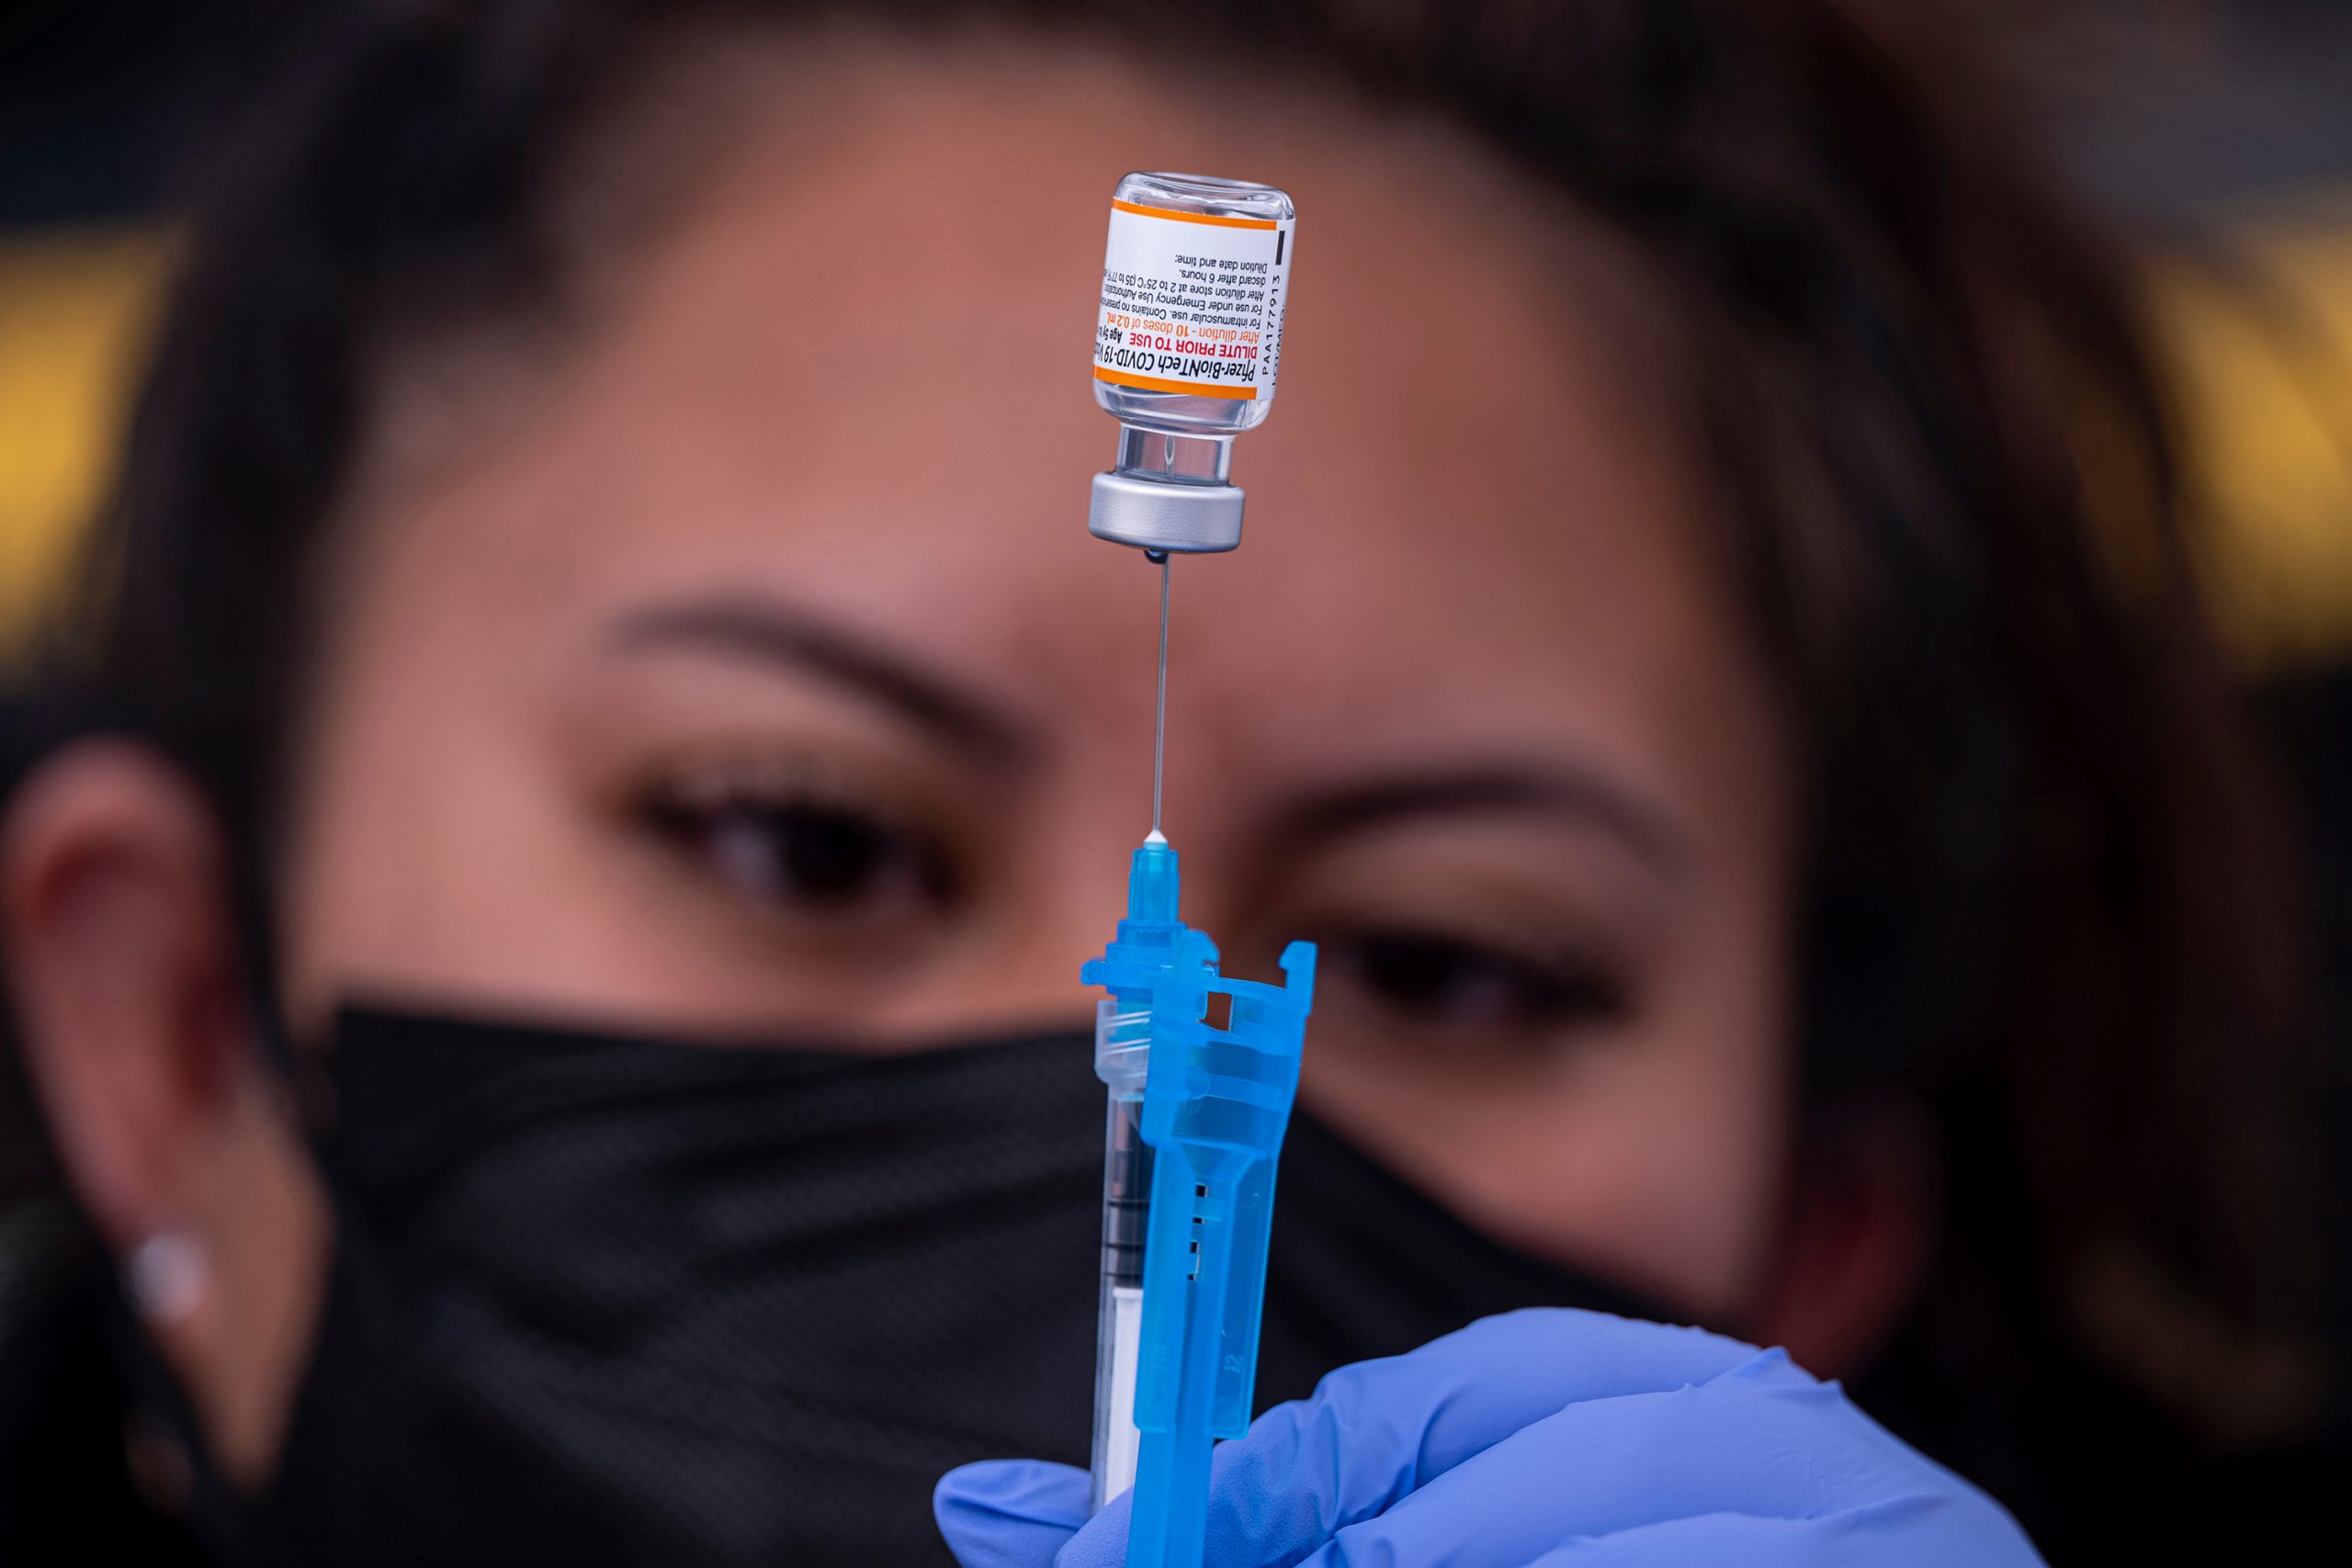 A healthcare worker prepares a dose of Pfizer-BioNTech Covid-19 vaccine at a vaccination site in Sa...